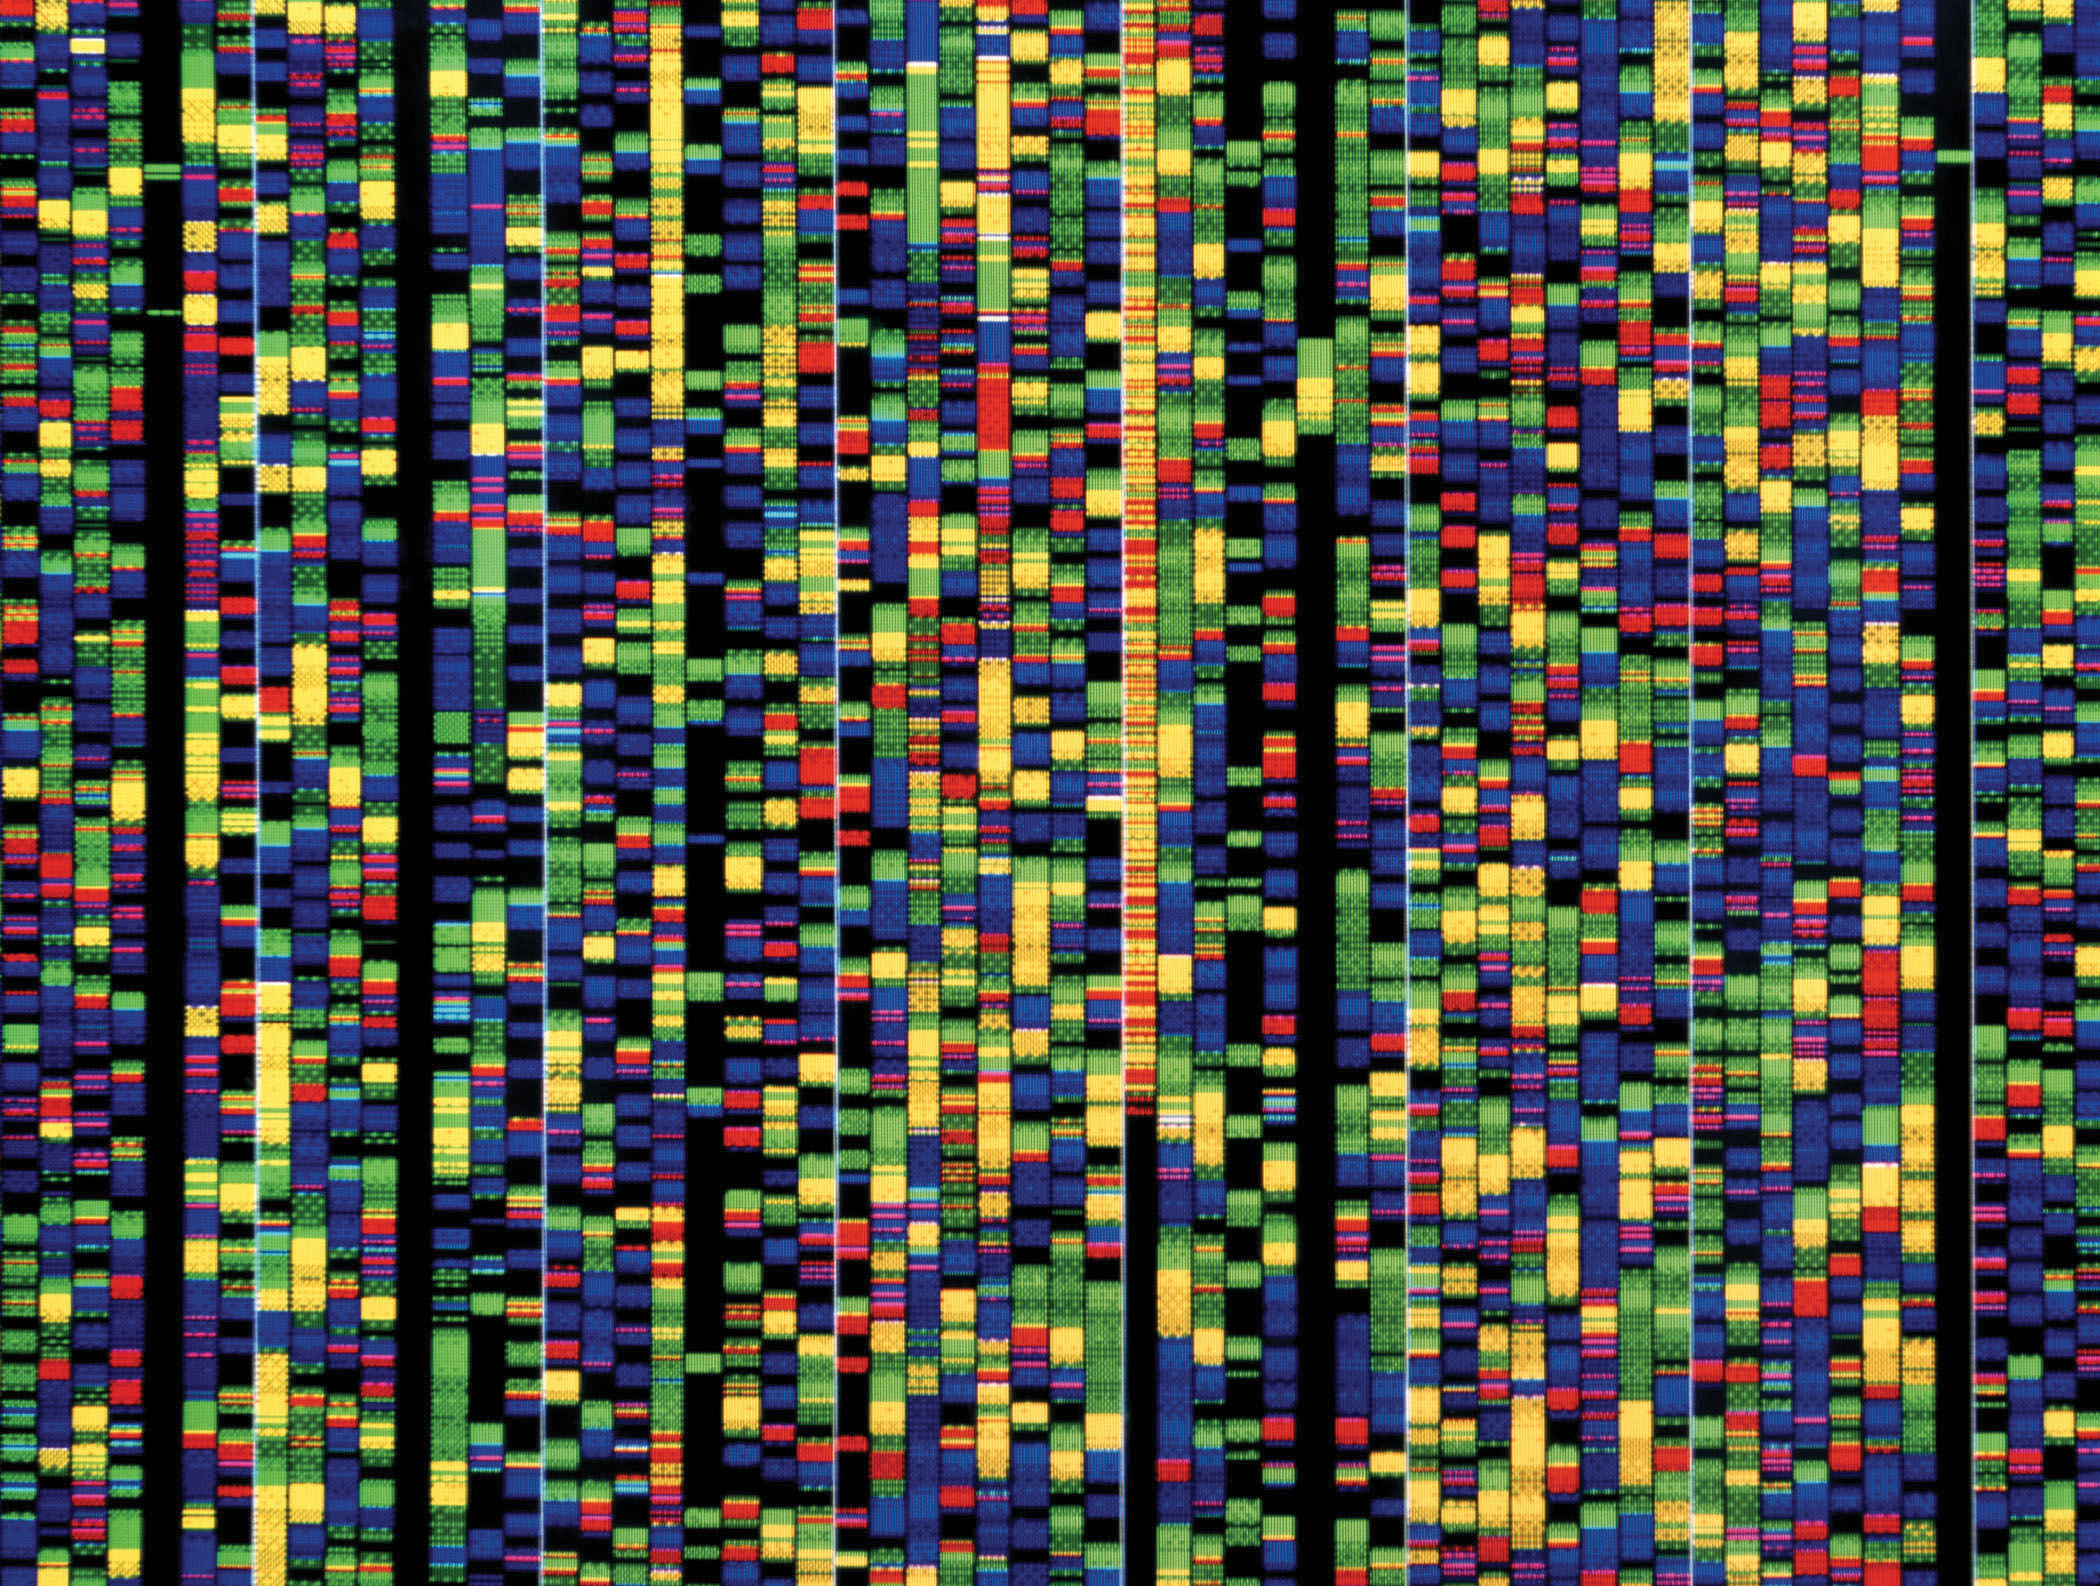 These colored bands on a computer screen represent the various building blocks of DNA that make up just a small portion of the human genome.